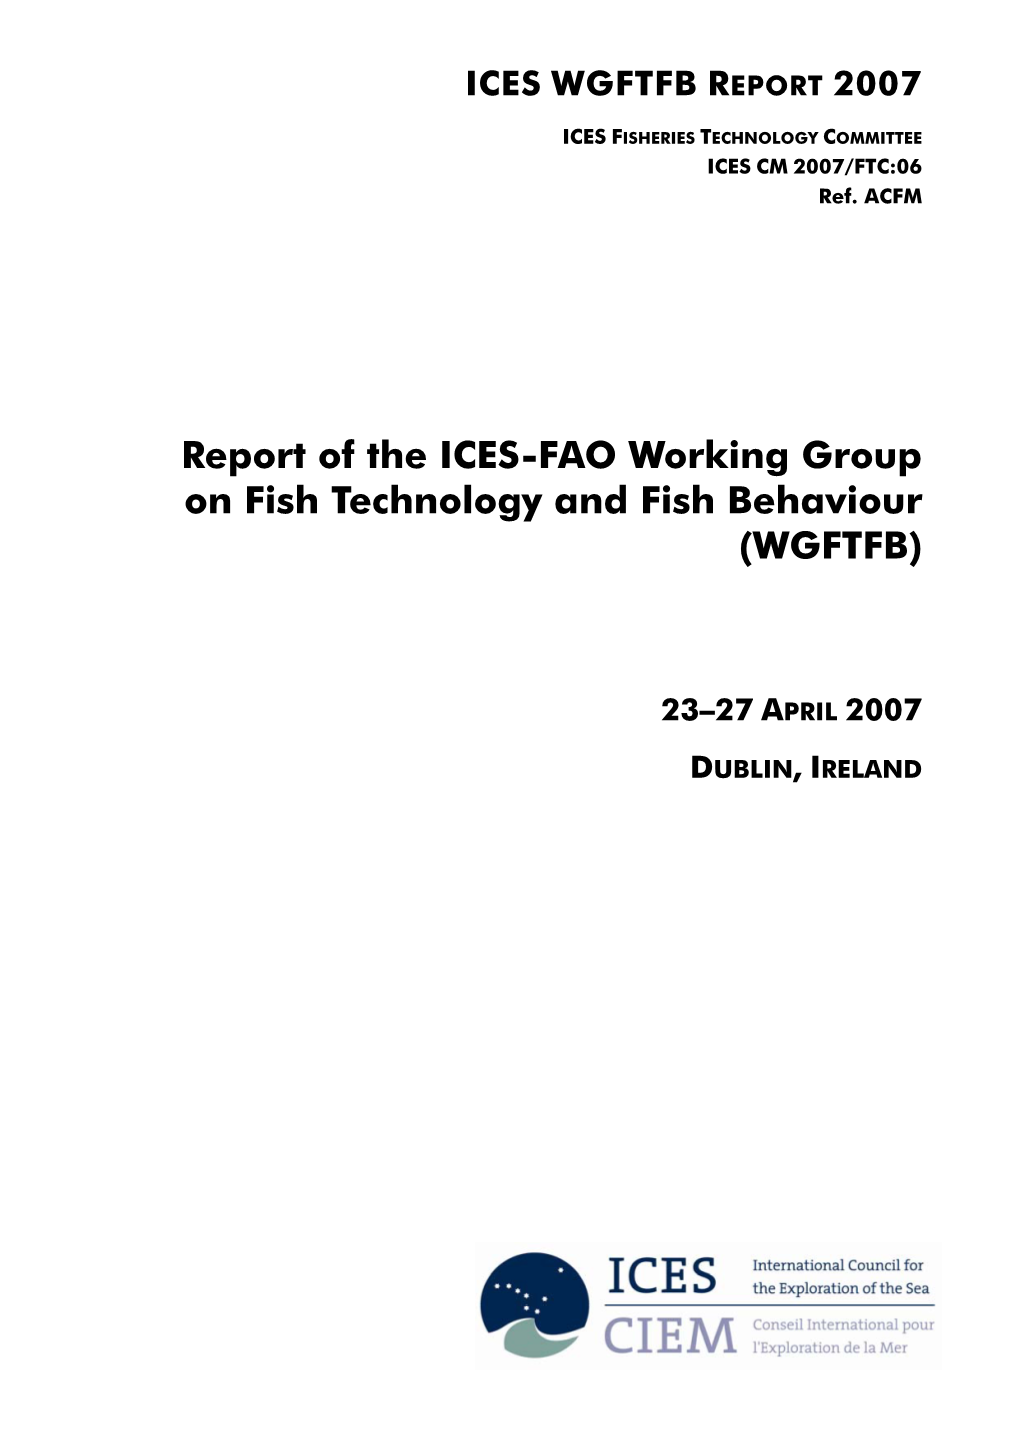 Report of the ICES-FAO Working Group on Fish Technology and Fish Behaviour (WGFTFB)